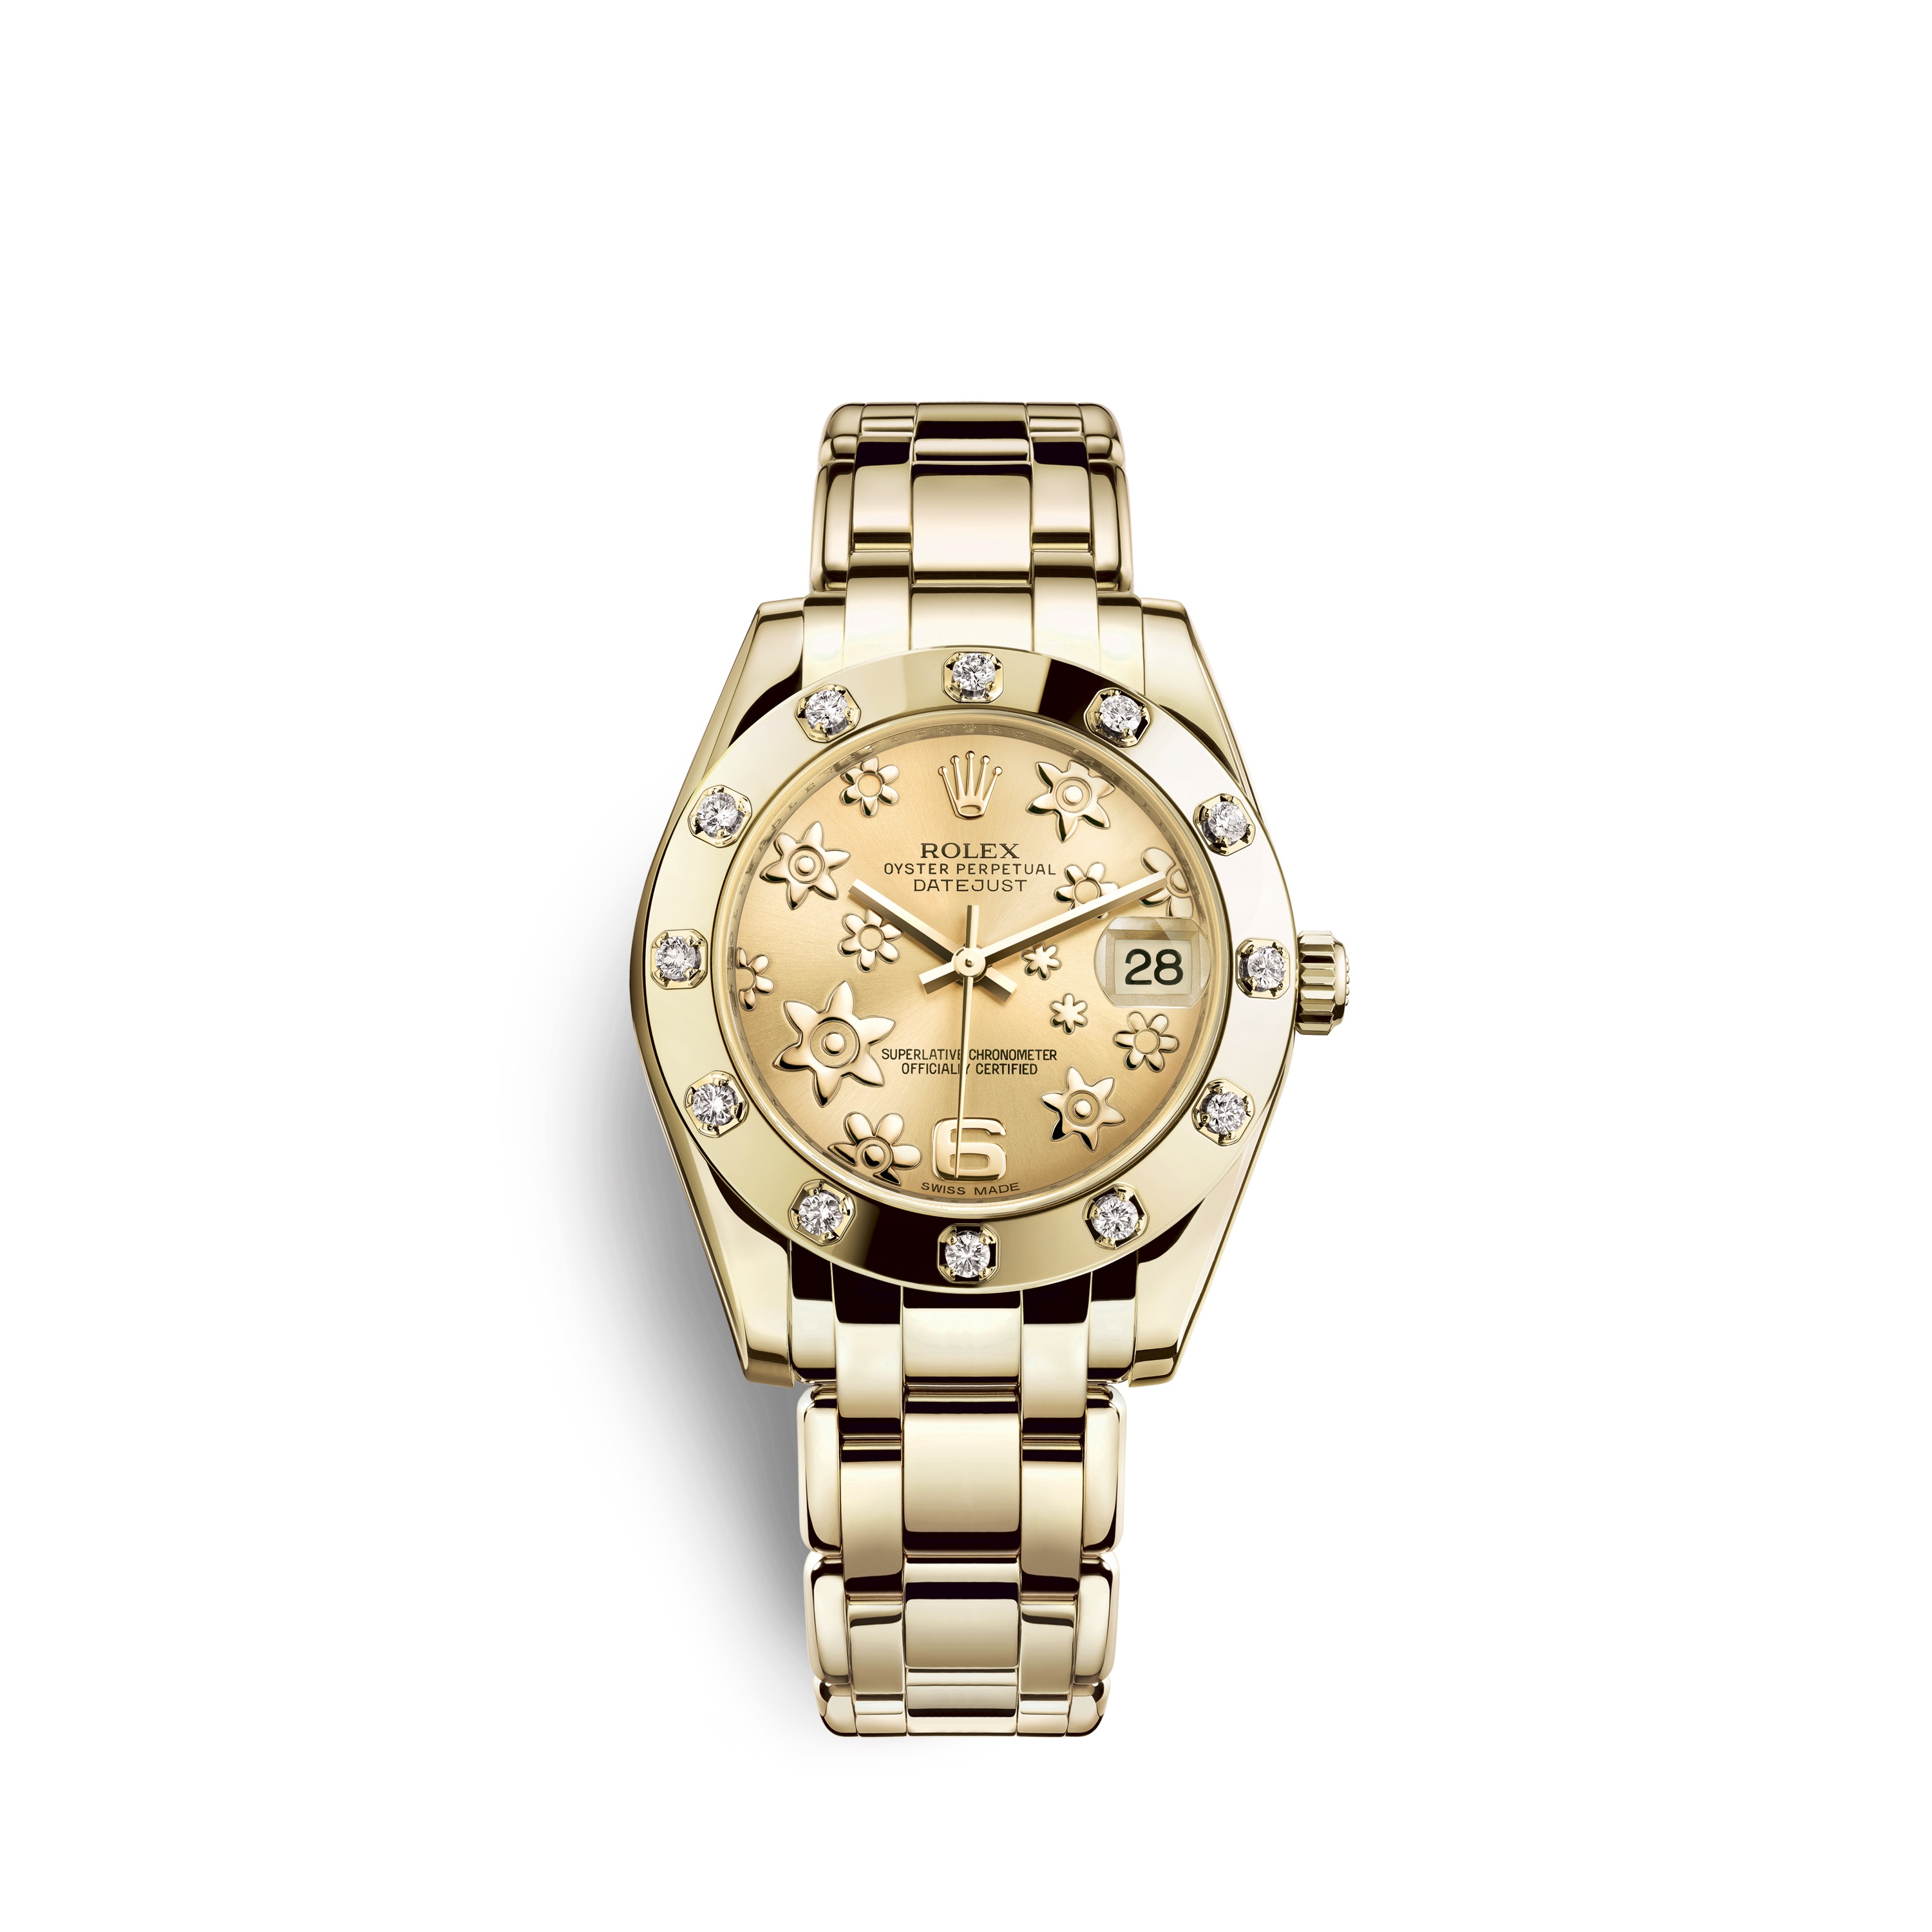 Pearlmaster 34 81318 Gold & Diamonds Watch (Champagne-Colour, Raised Floral Motif)